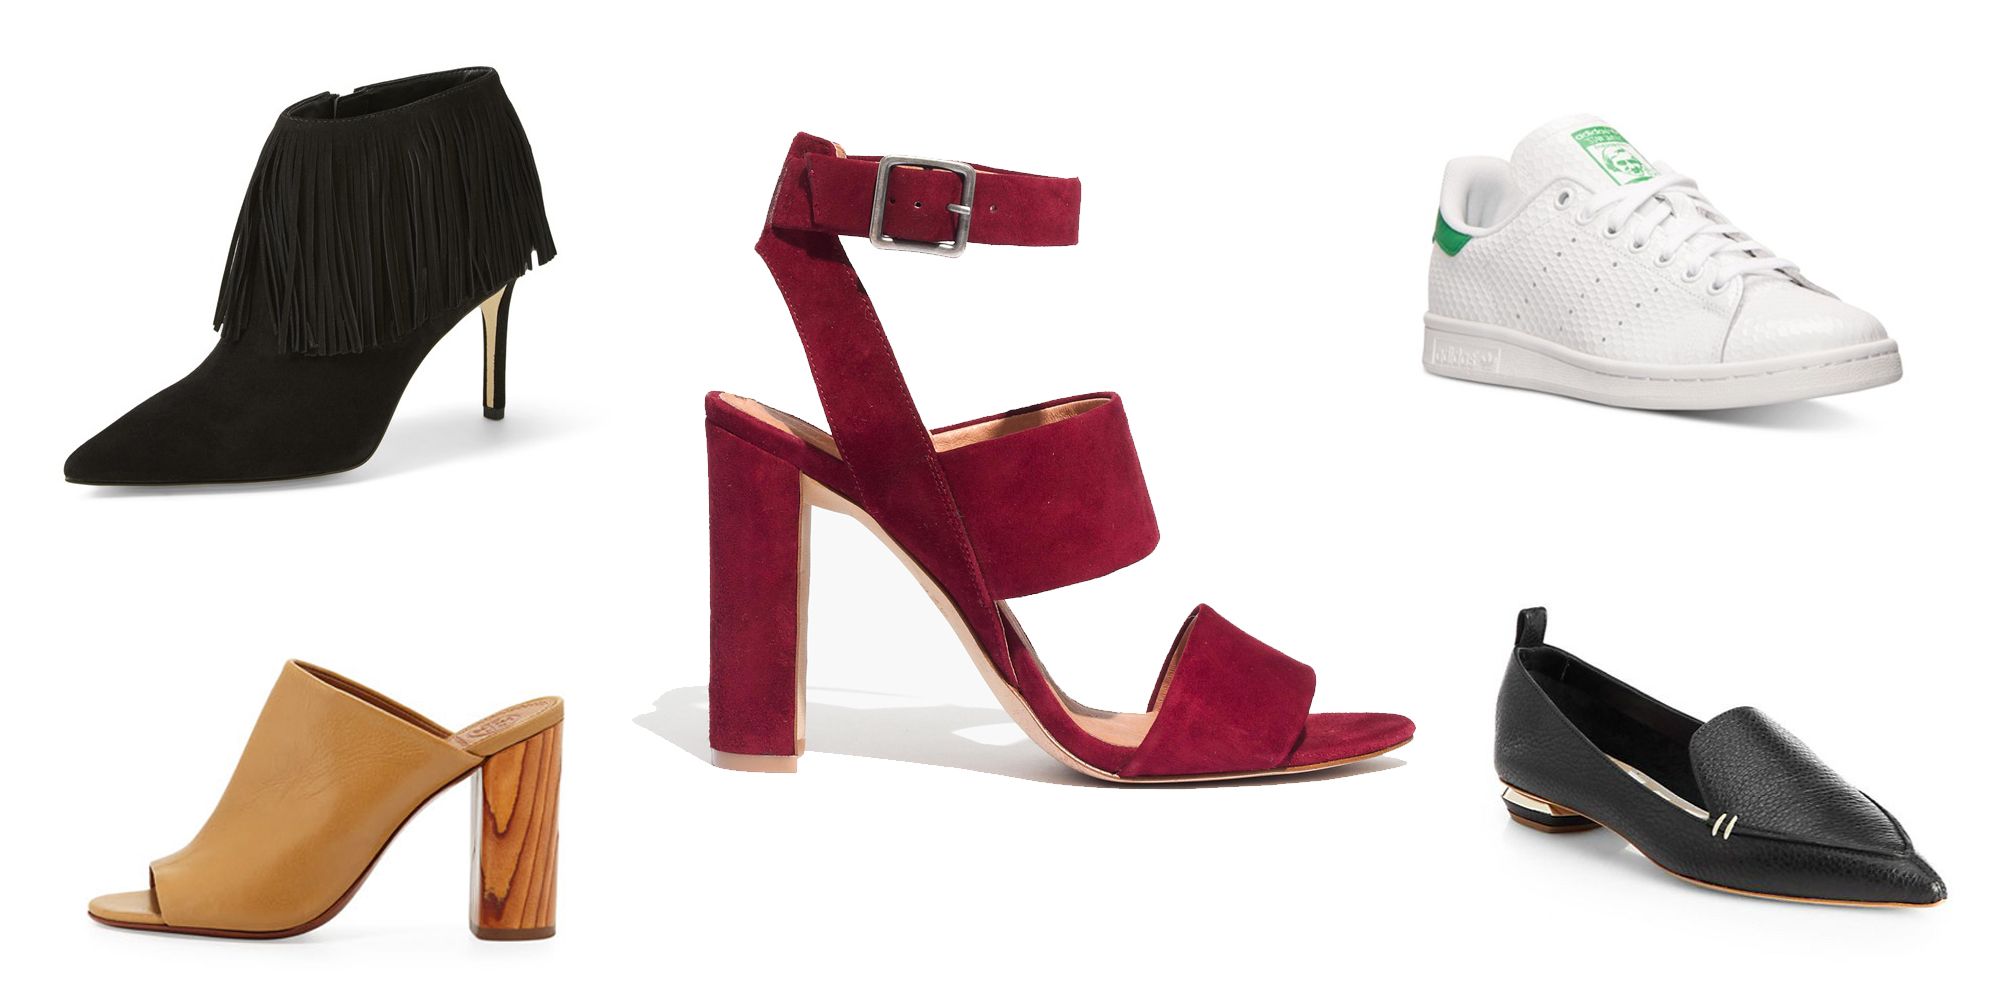 2015's Top Shoes - Heel, Sandal, and Trends of 2015